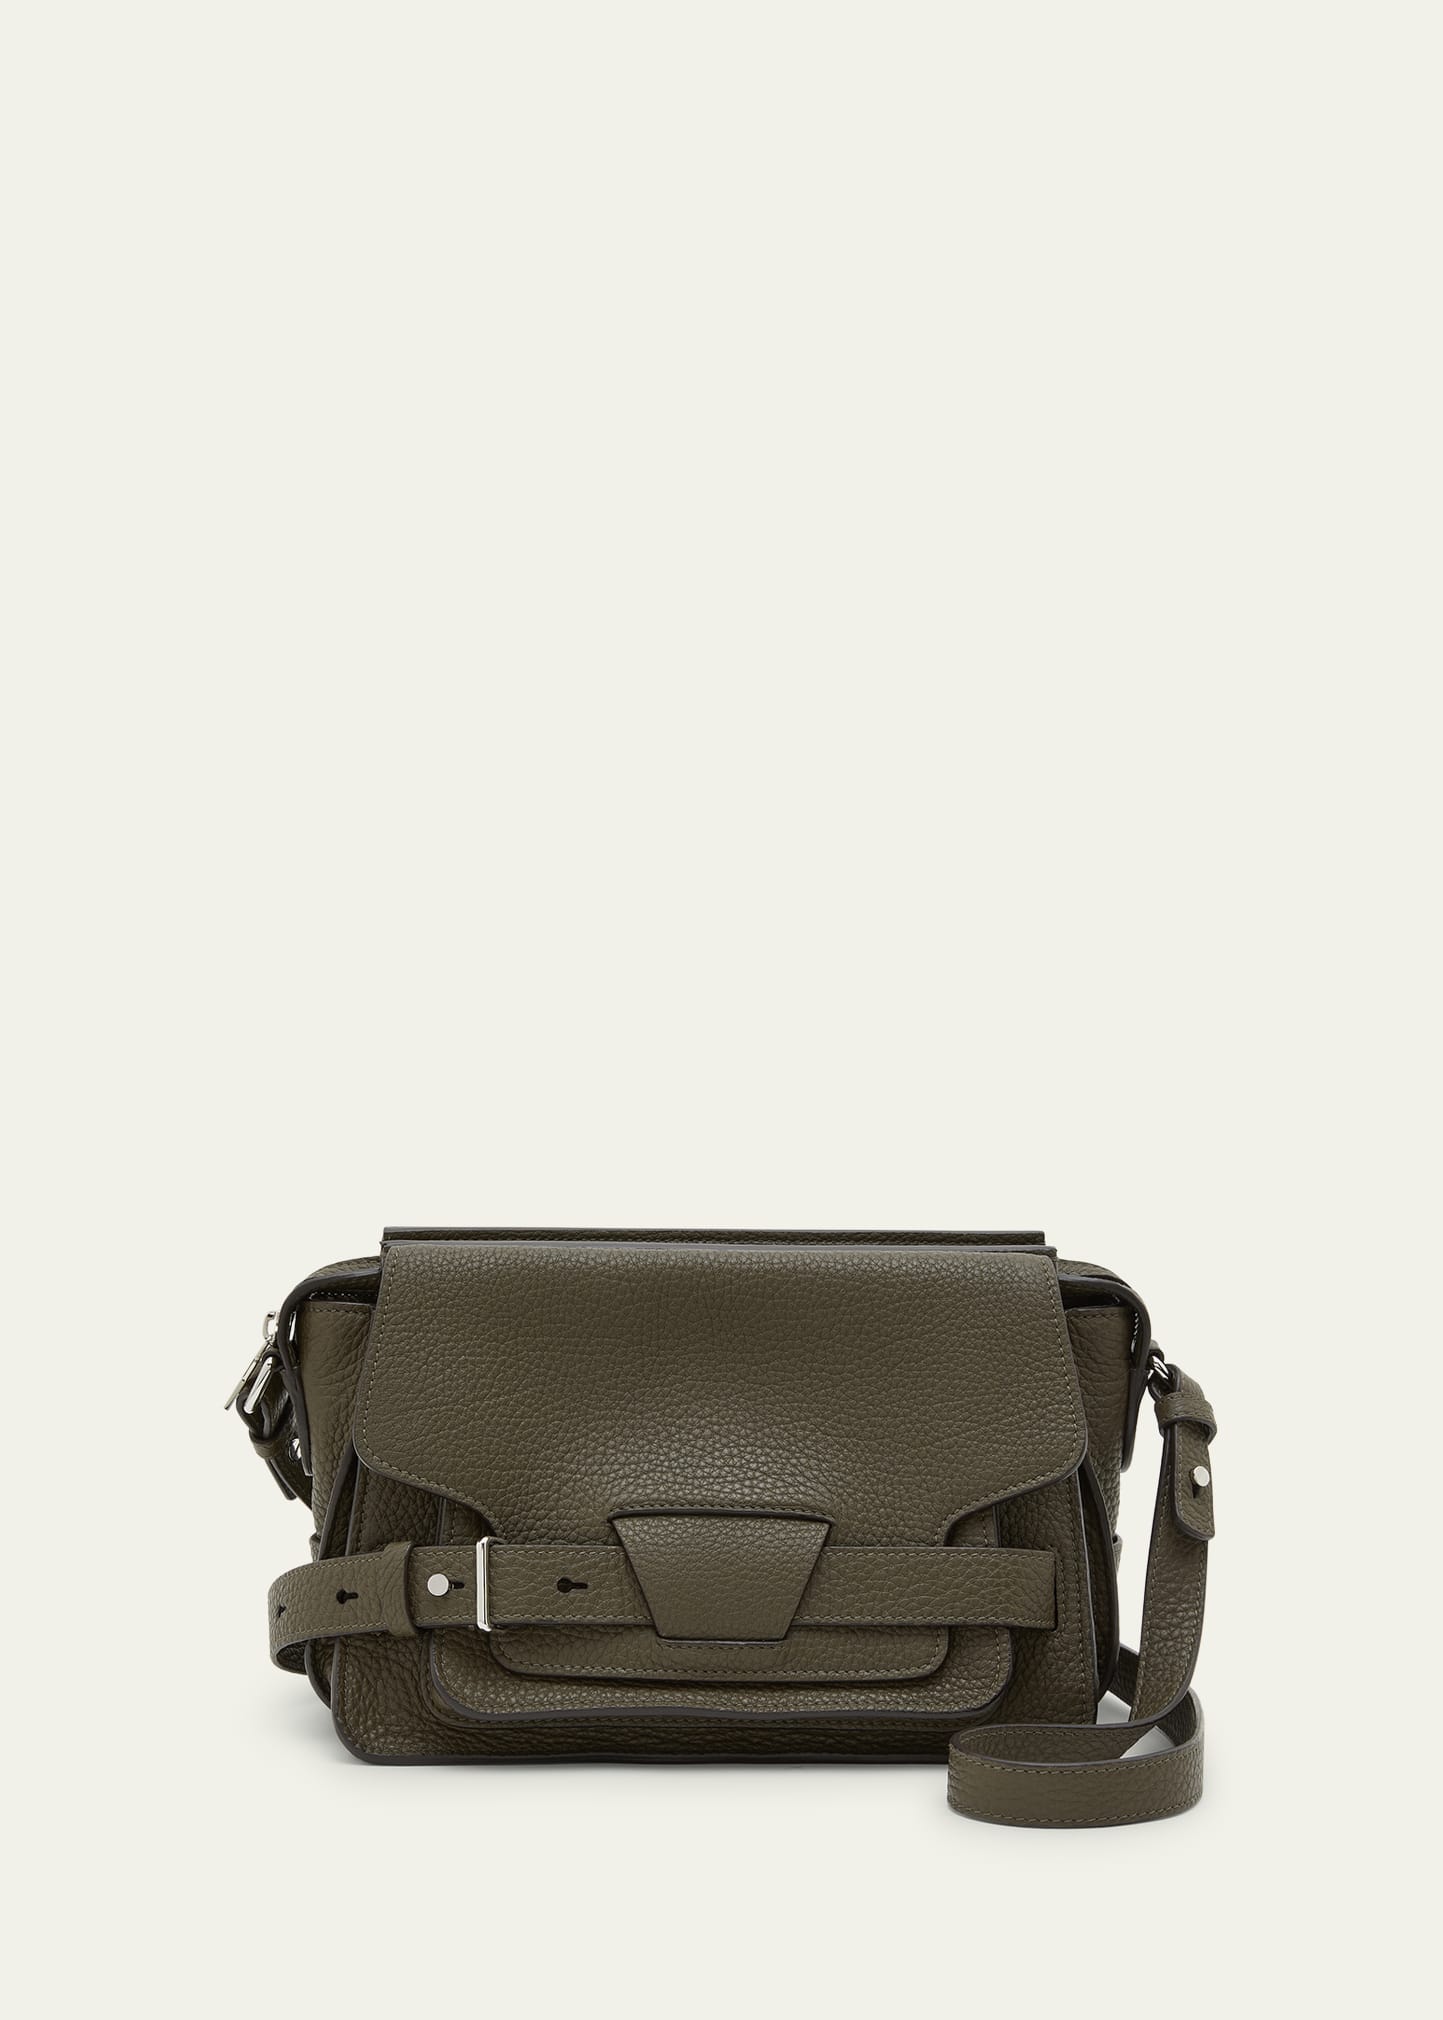 Proenza Schouler Beacon Saddle Leather Crossbody Bag In 324 Olive